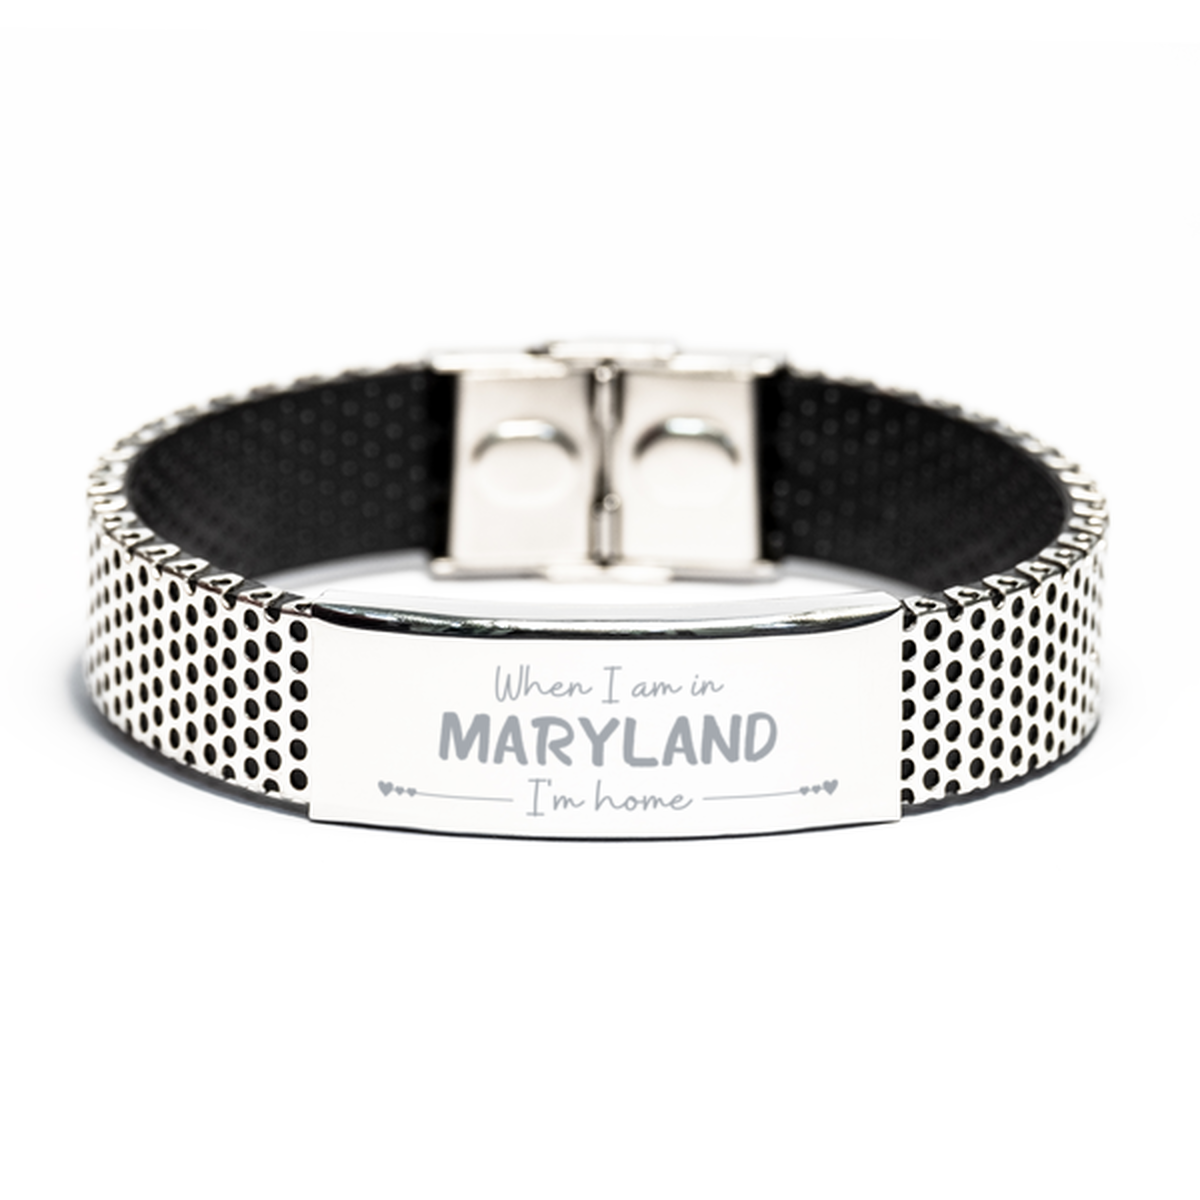 When I am in Maryland I'm home Stainless Steel Bracelet, Cheap Gifts For Maryland, State Maryland Birthday Gifts for Friends Coworker